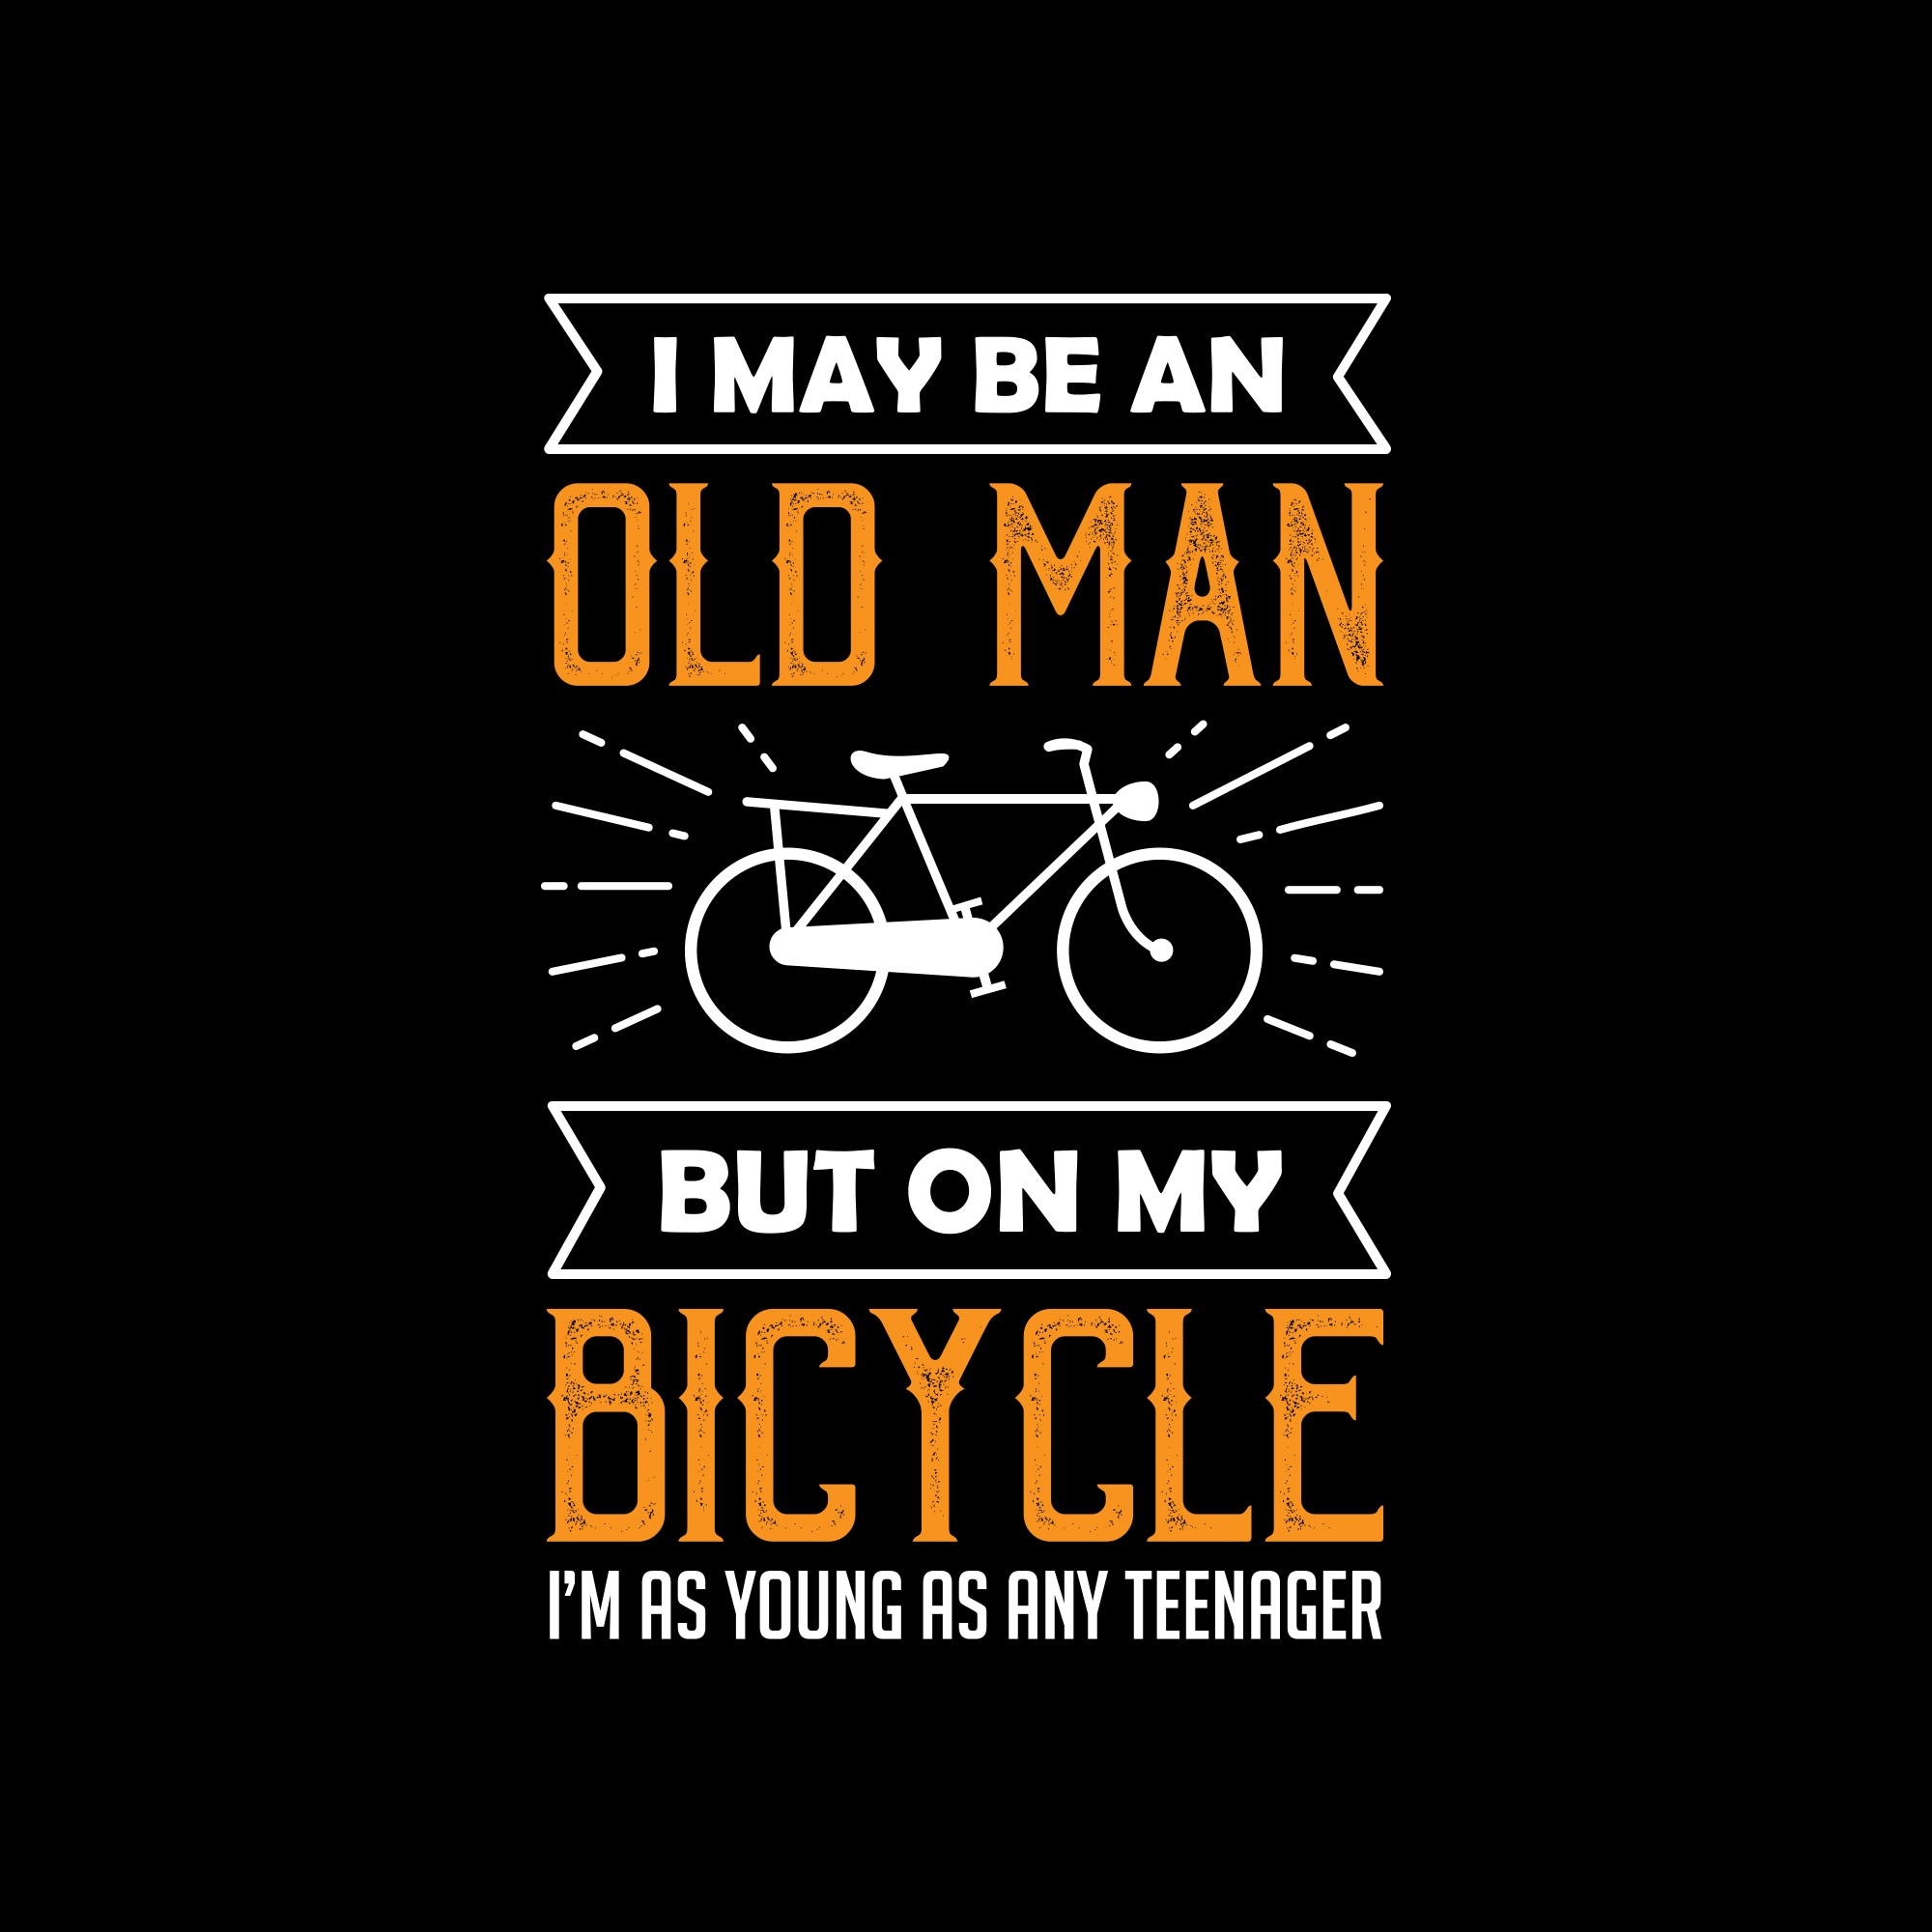 Happy World Bicycle Day 2022 Wishes, greetings, WhatsApp status, images and quotes to share with your loved ones. (Image: Shutterstock) 